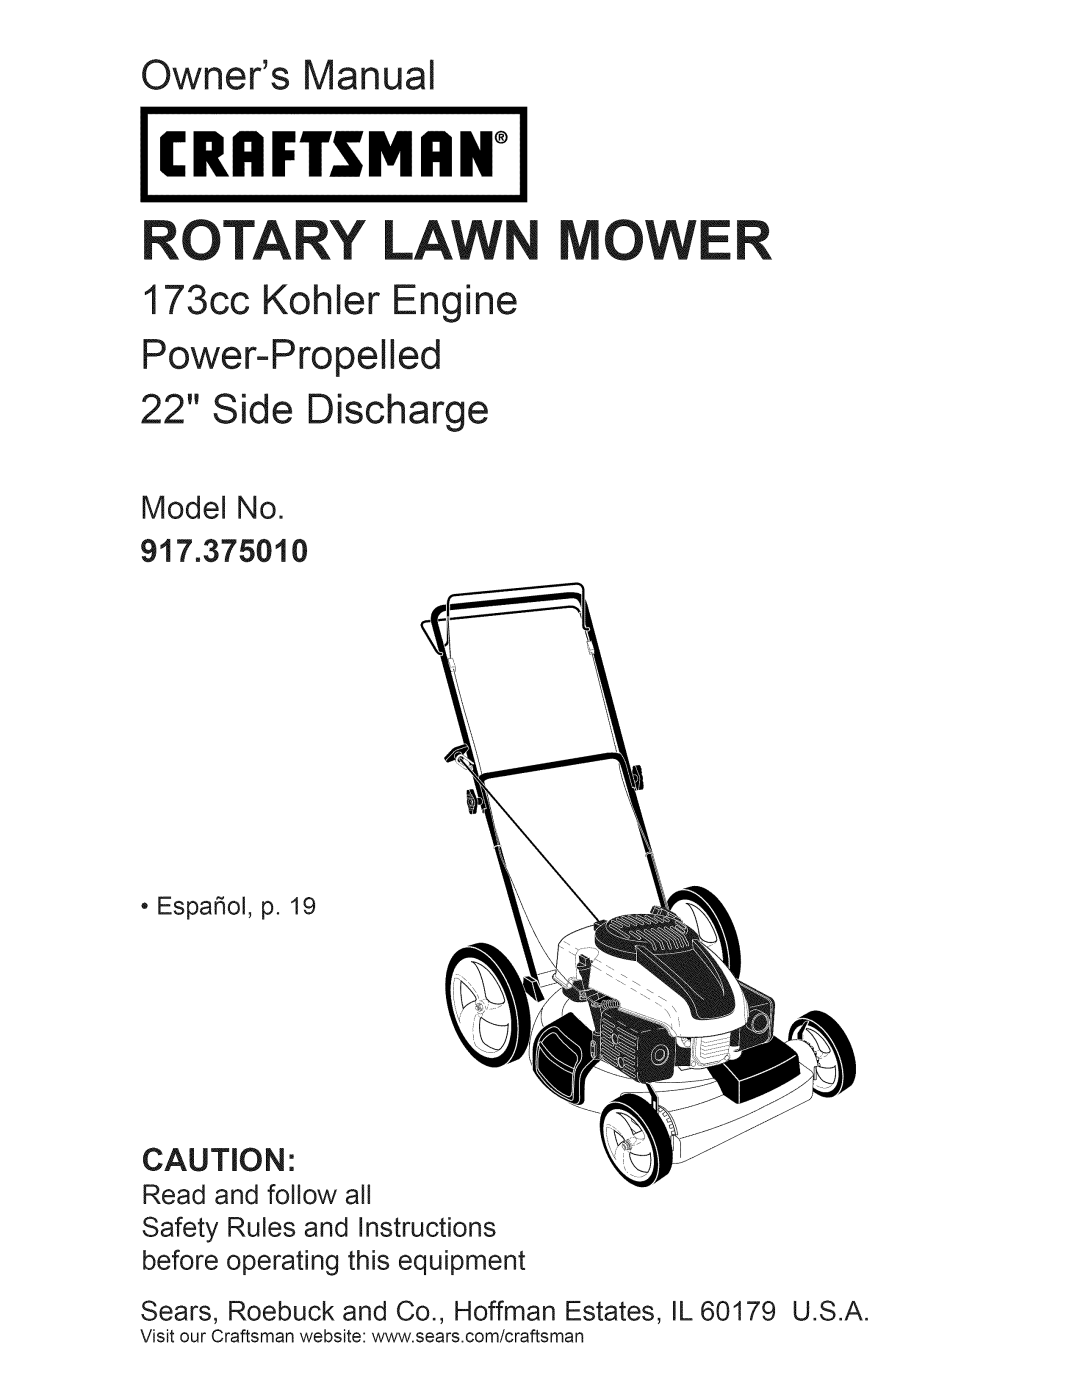 Craftsman owner manual Model No 917.375010, Craftsman, Rotary Lawn Mower, Owners Manual, Side Discharge 